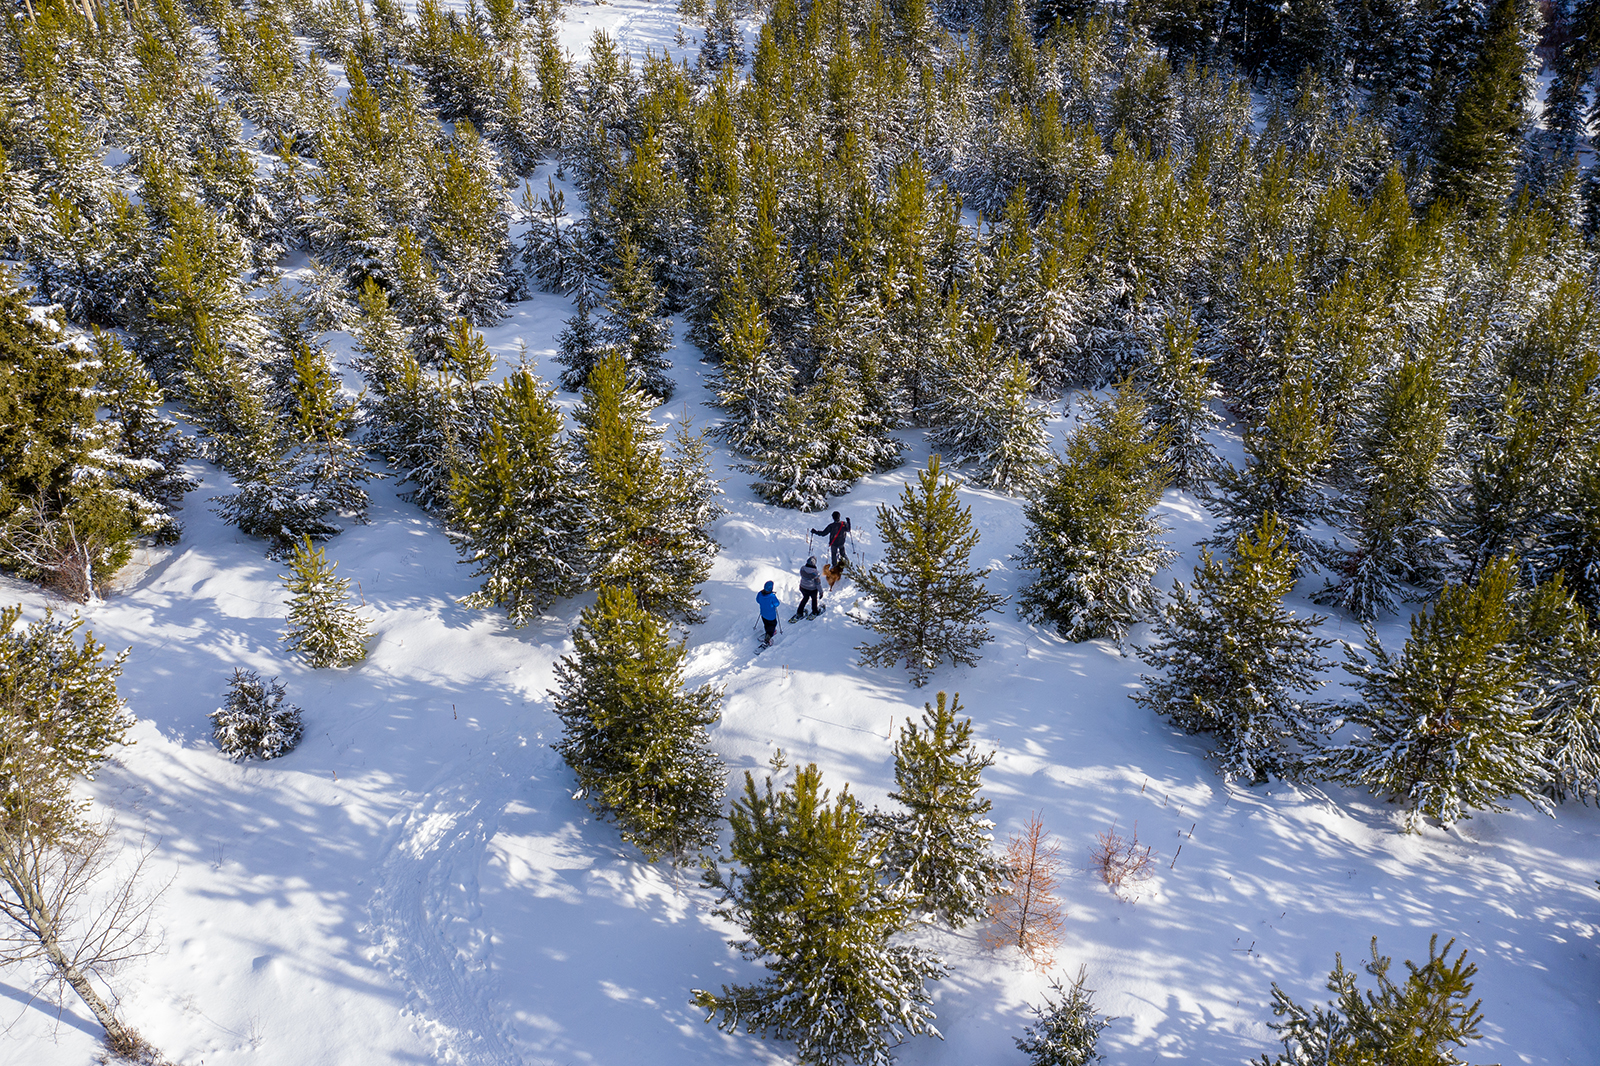 Kamloops Other top view of tall trees and three people in the snow